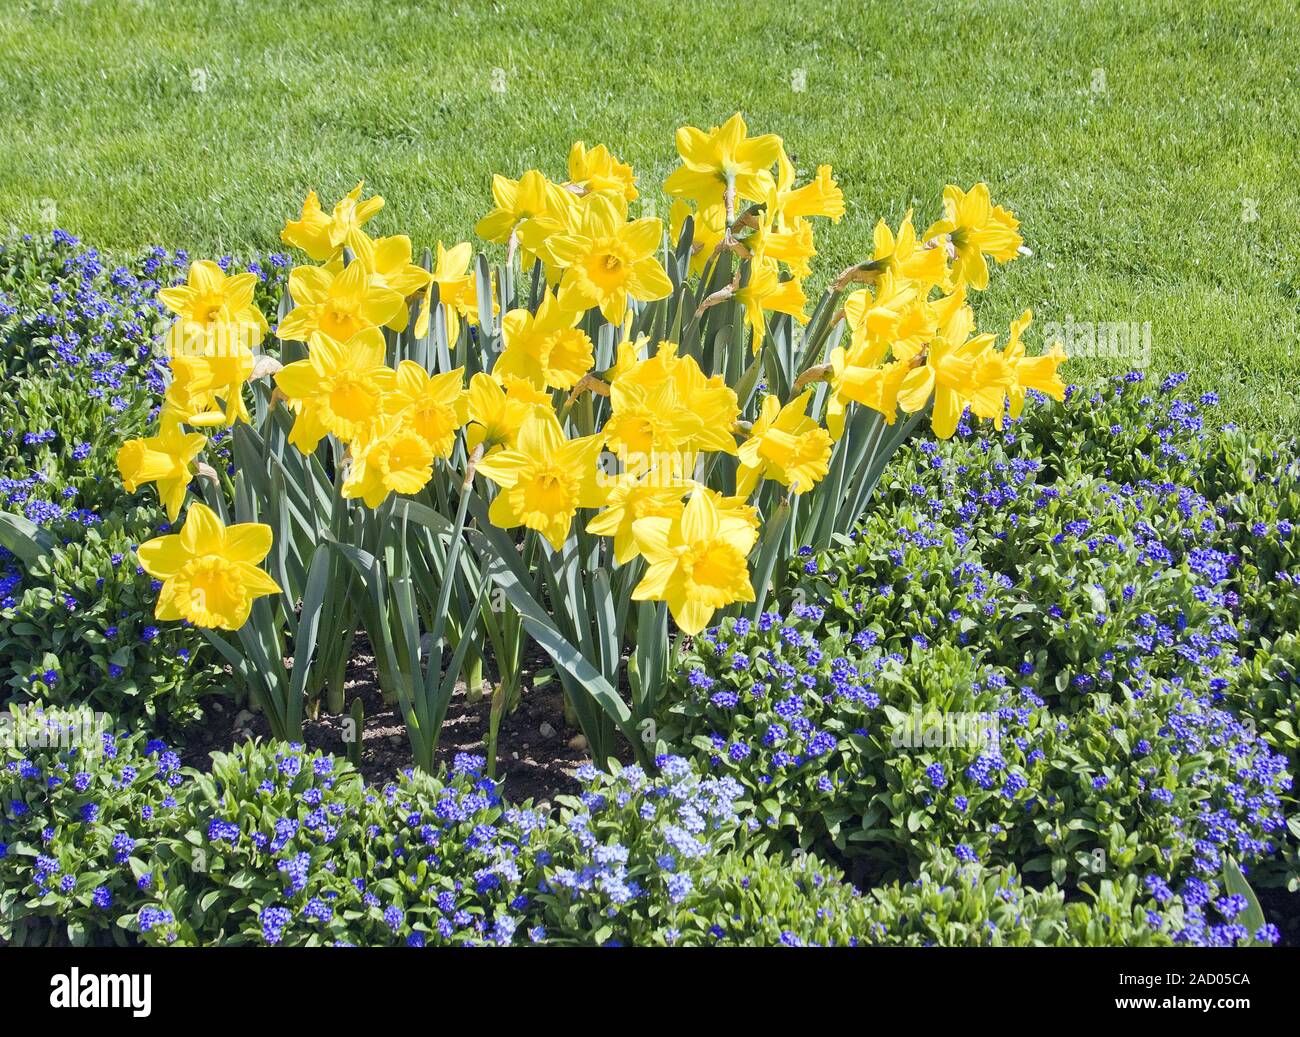 Lent lilys  Narcissus pseudonarcissus with forget me not  Myosotis Stock Photo